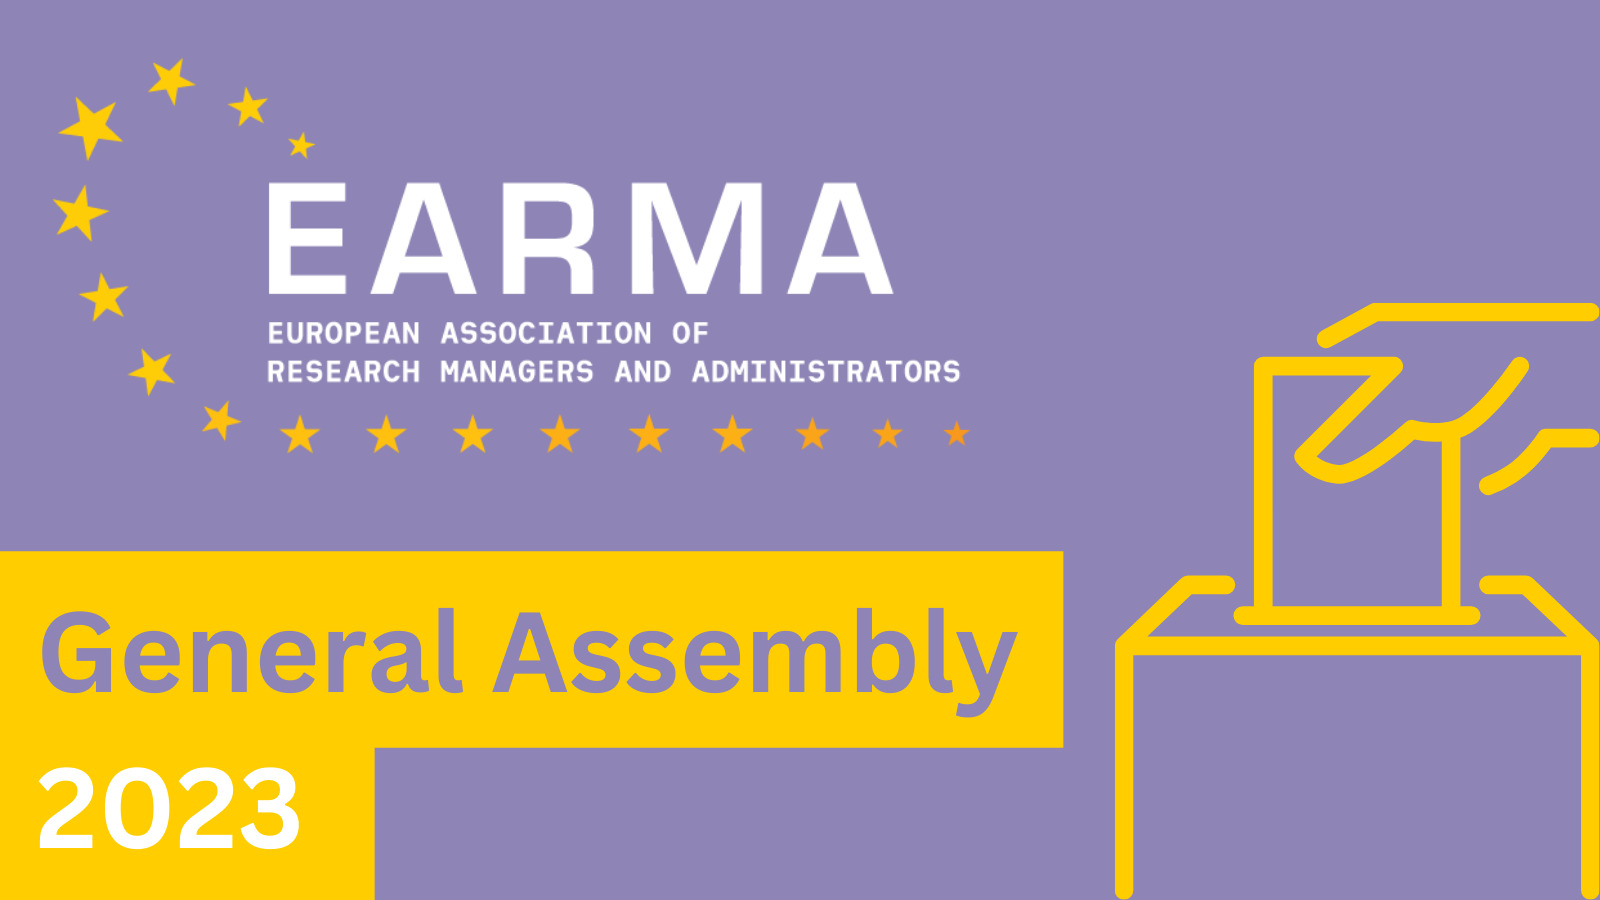 The EARMA Online General Assembly 2023